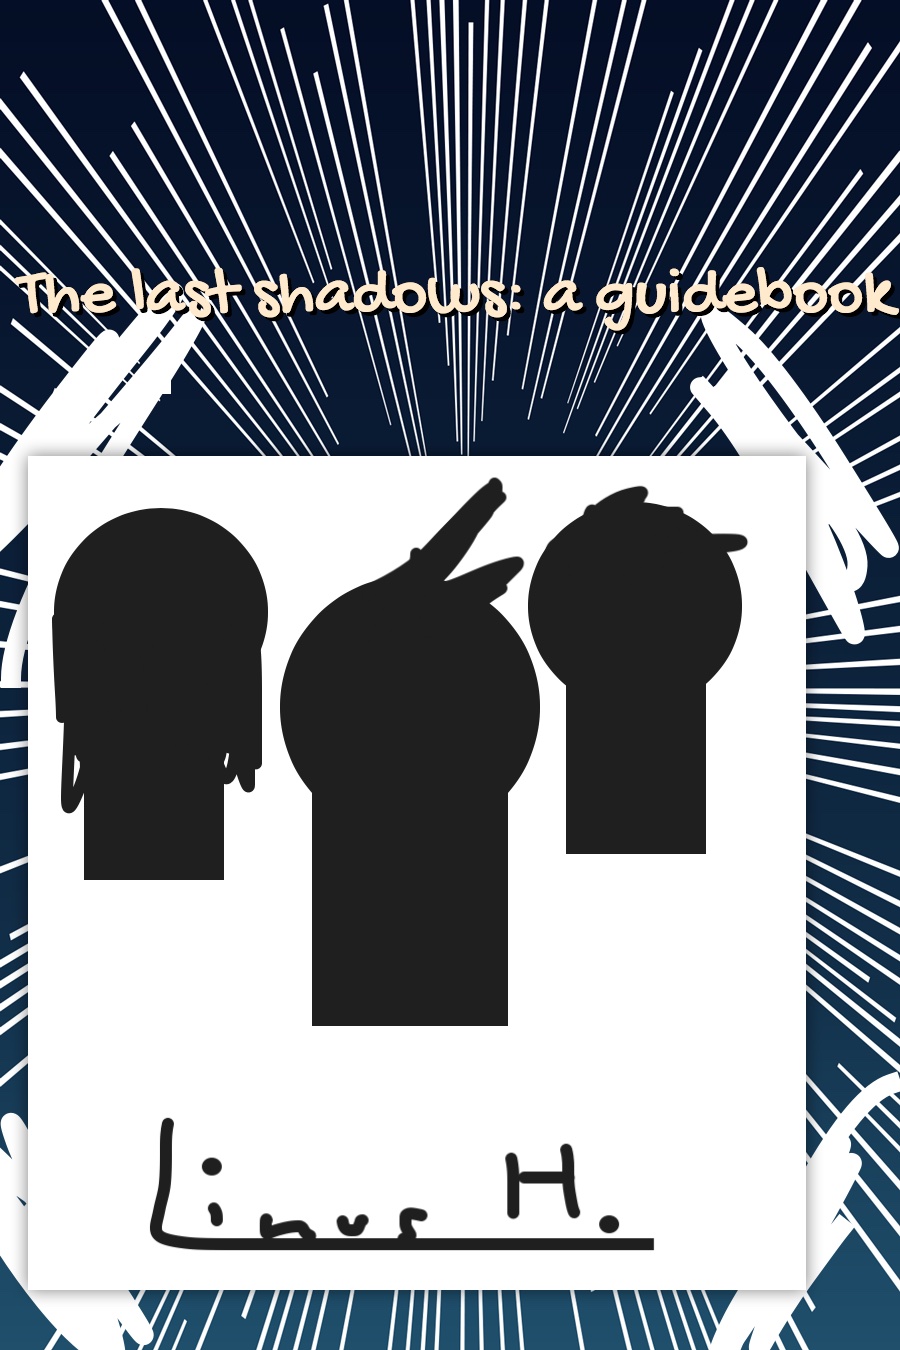 The Last Shadows a guidebook by Linus H